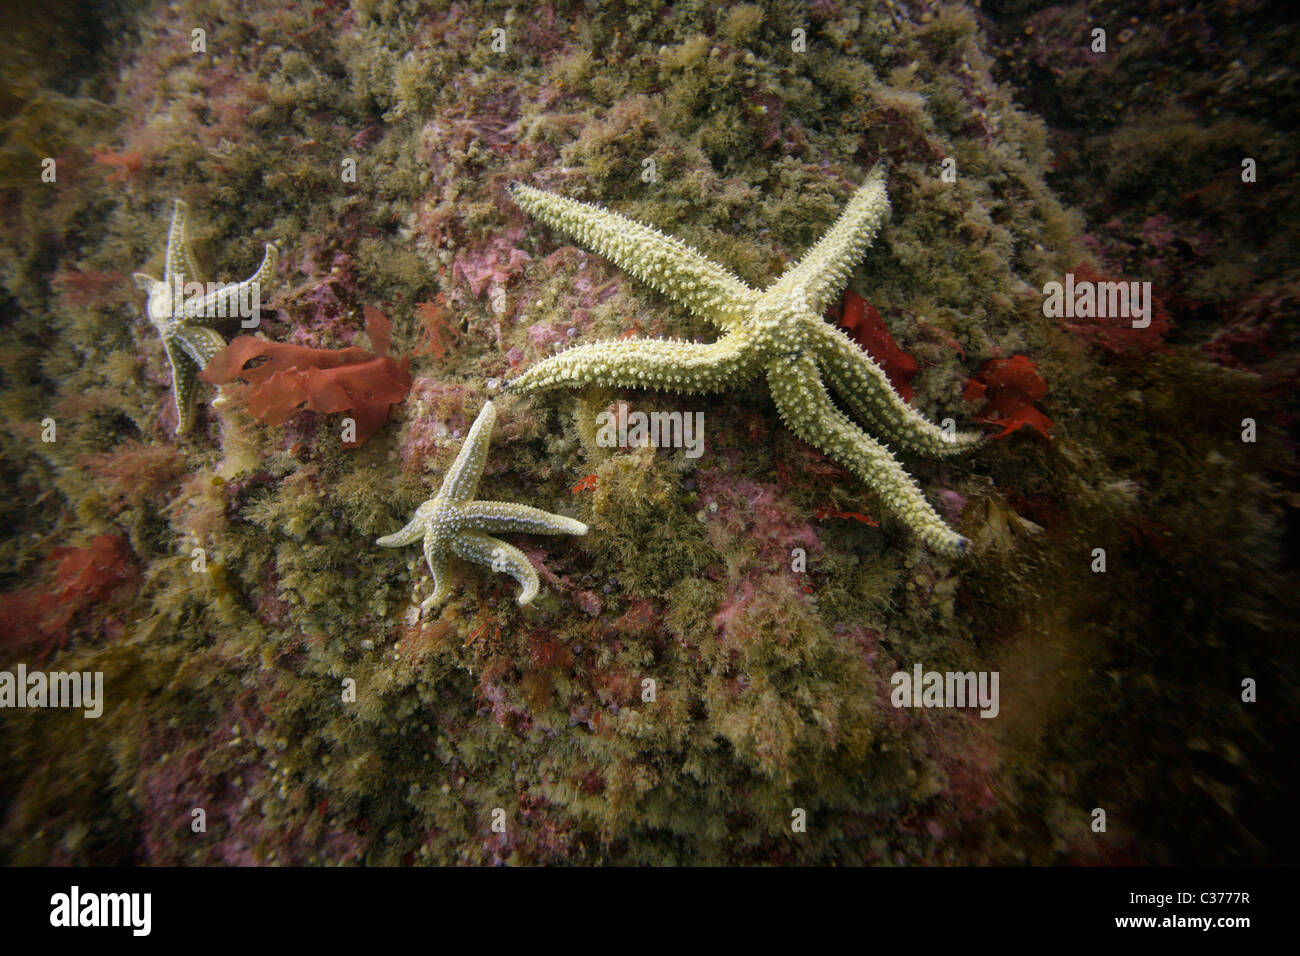 Three common starfish (Asterias rubens) cling to a rock in the waters of the Atlantic Ocean in the Outer Hebrides of Scotland. Stock Photo